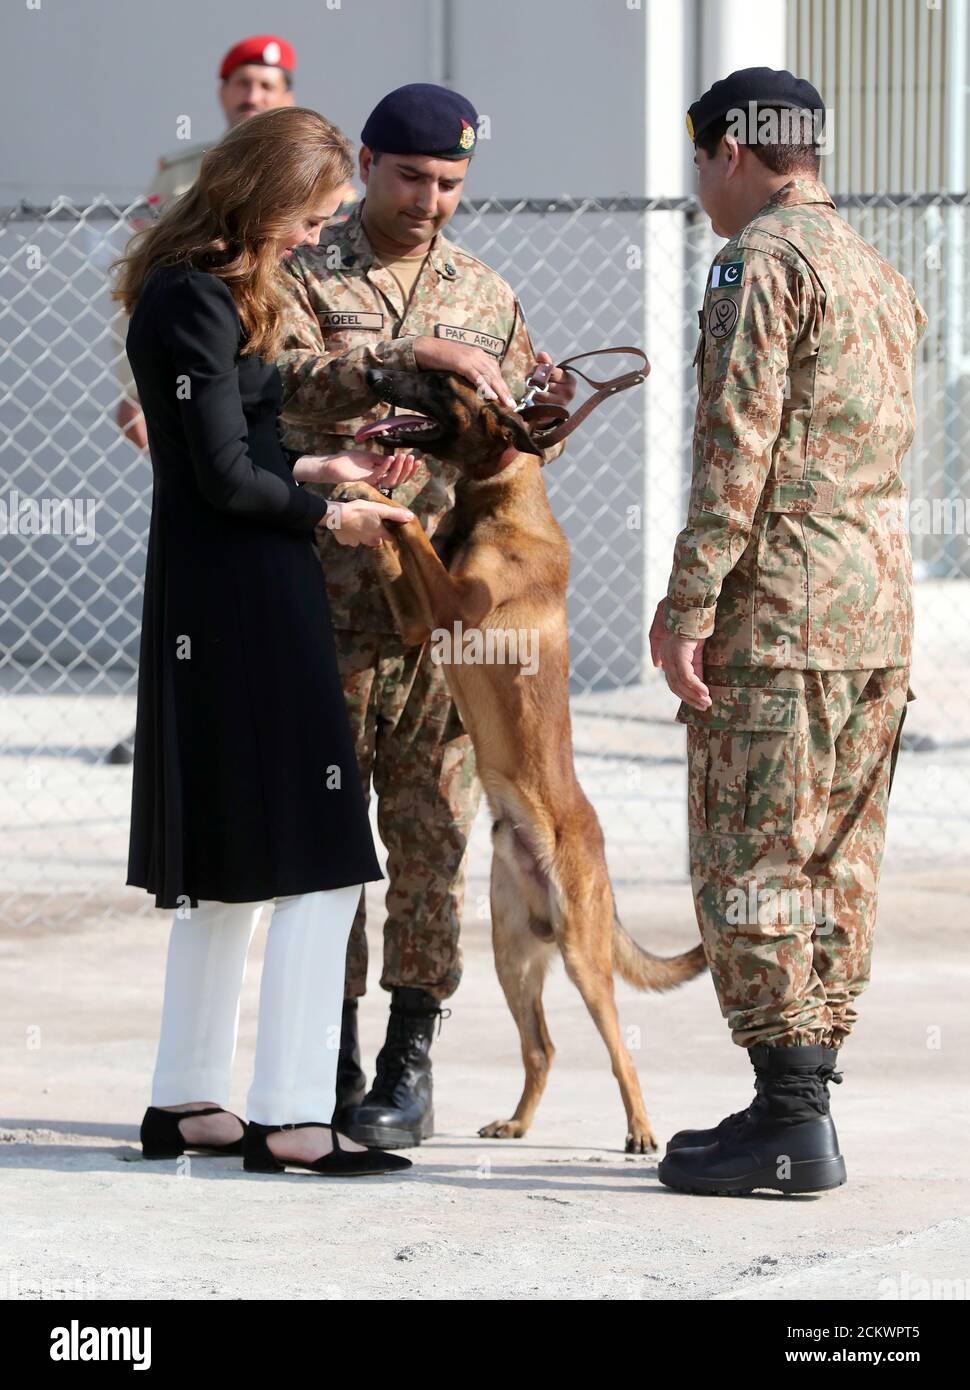 Catherine, Duchess of Cambridge meets with Captain Aqeel of the Pakistan Army and Belgian Malinois dog Tutu as she visits an Army Canine Centre, where Britain provides support to programme that